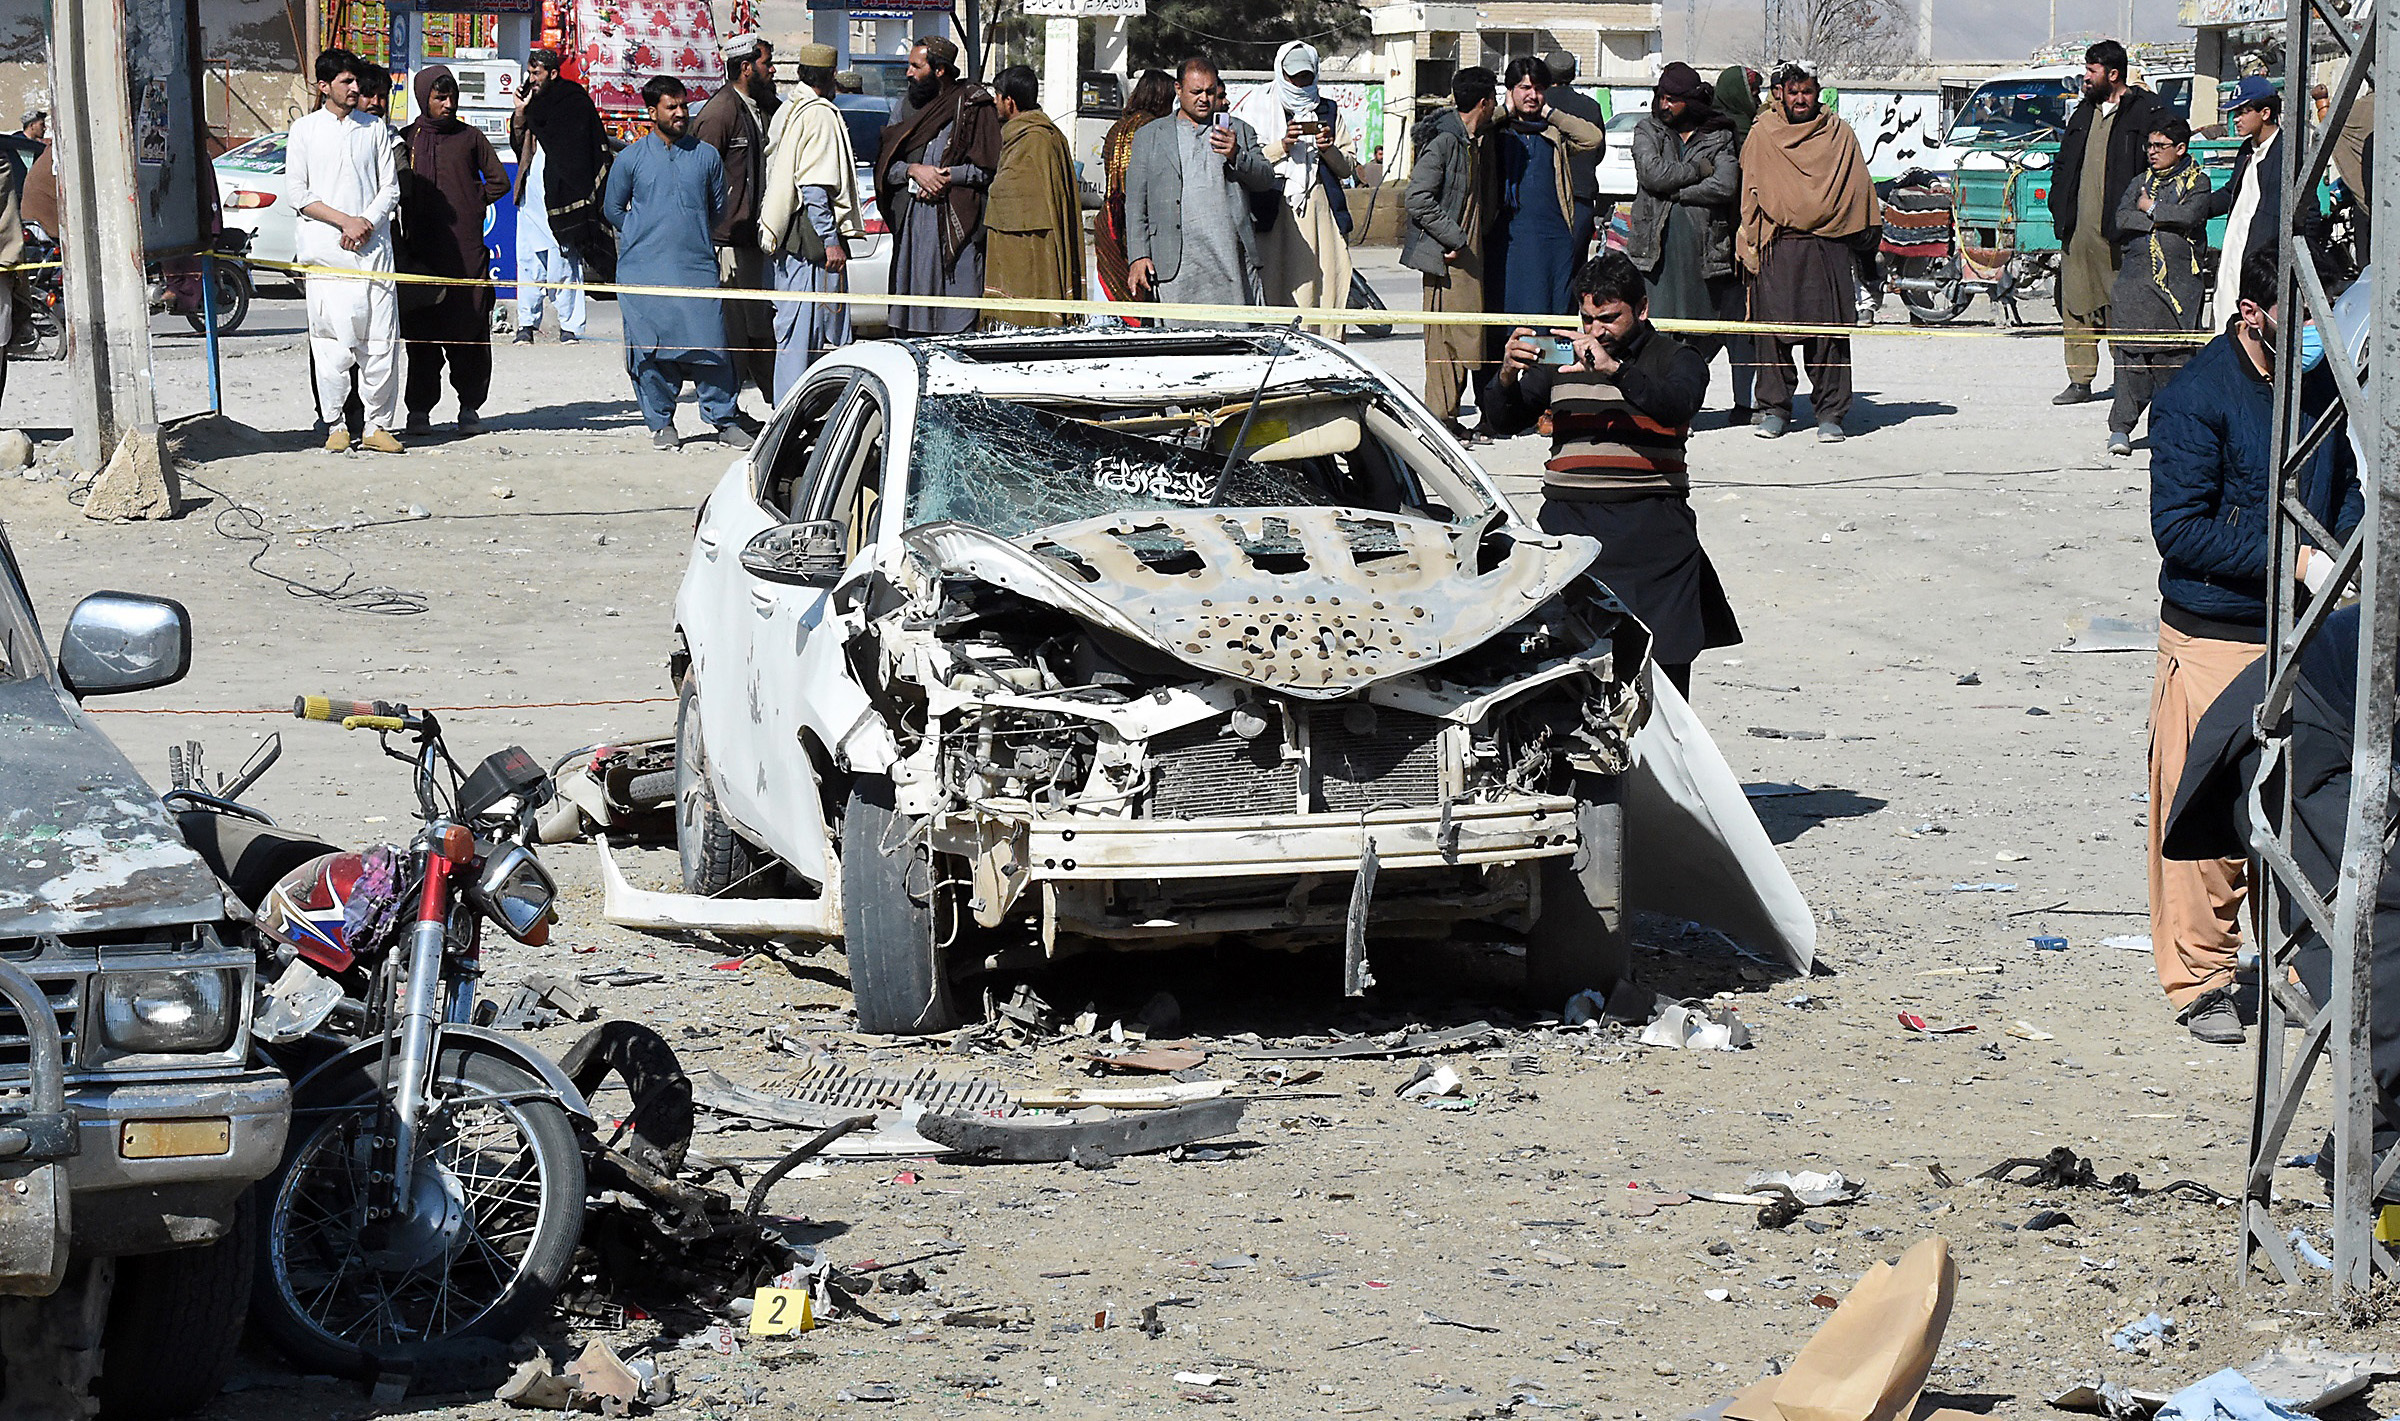 Pictures show the aftermath of two blasts in Balochistan’s Pishin and Qila Saifullah on Wednesday, Feb 7.